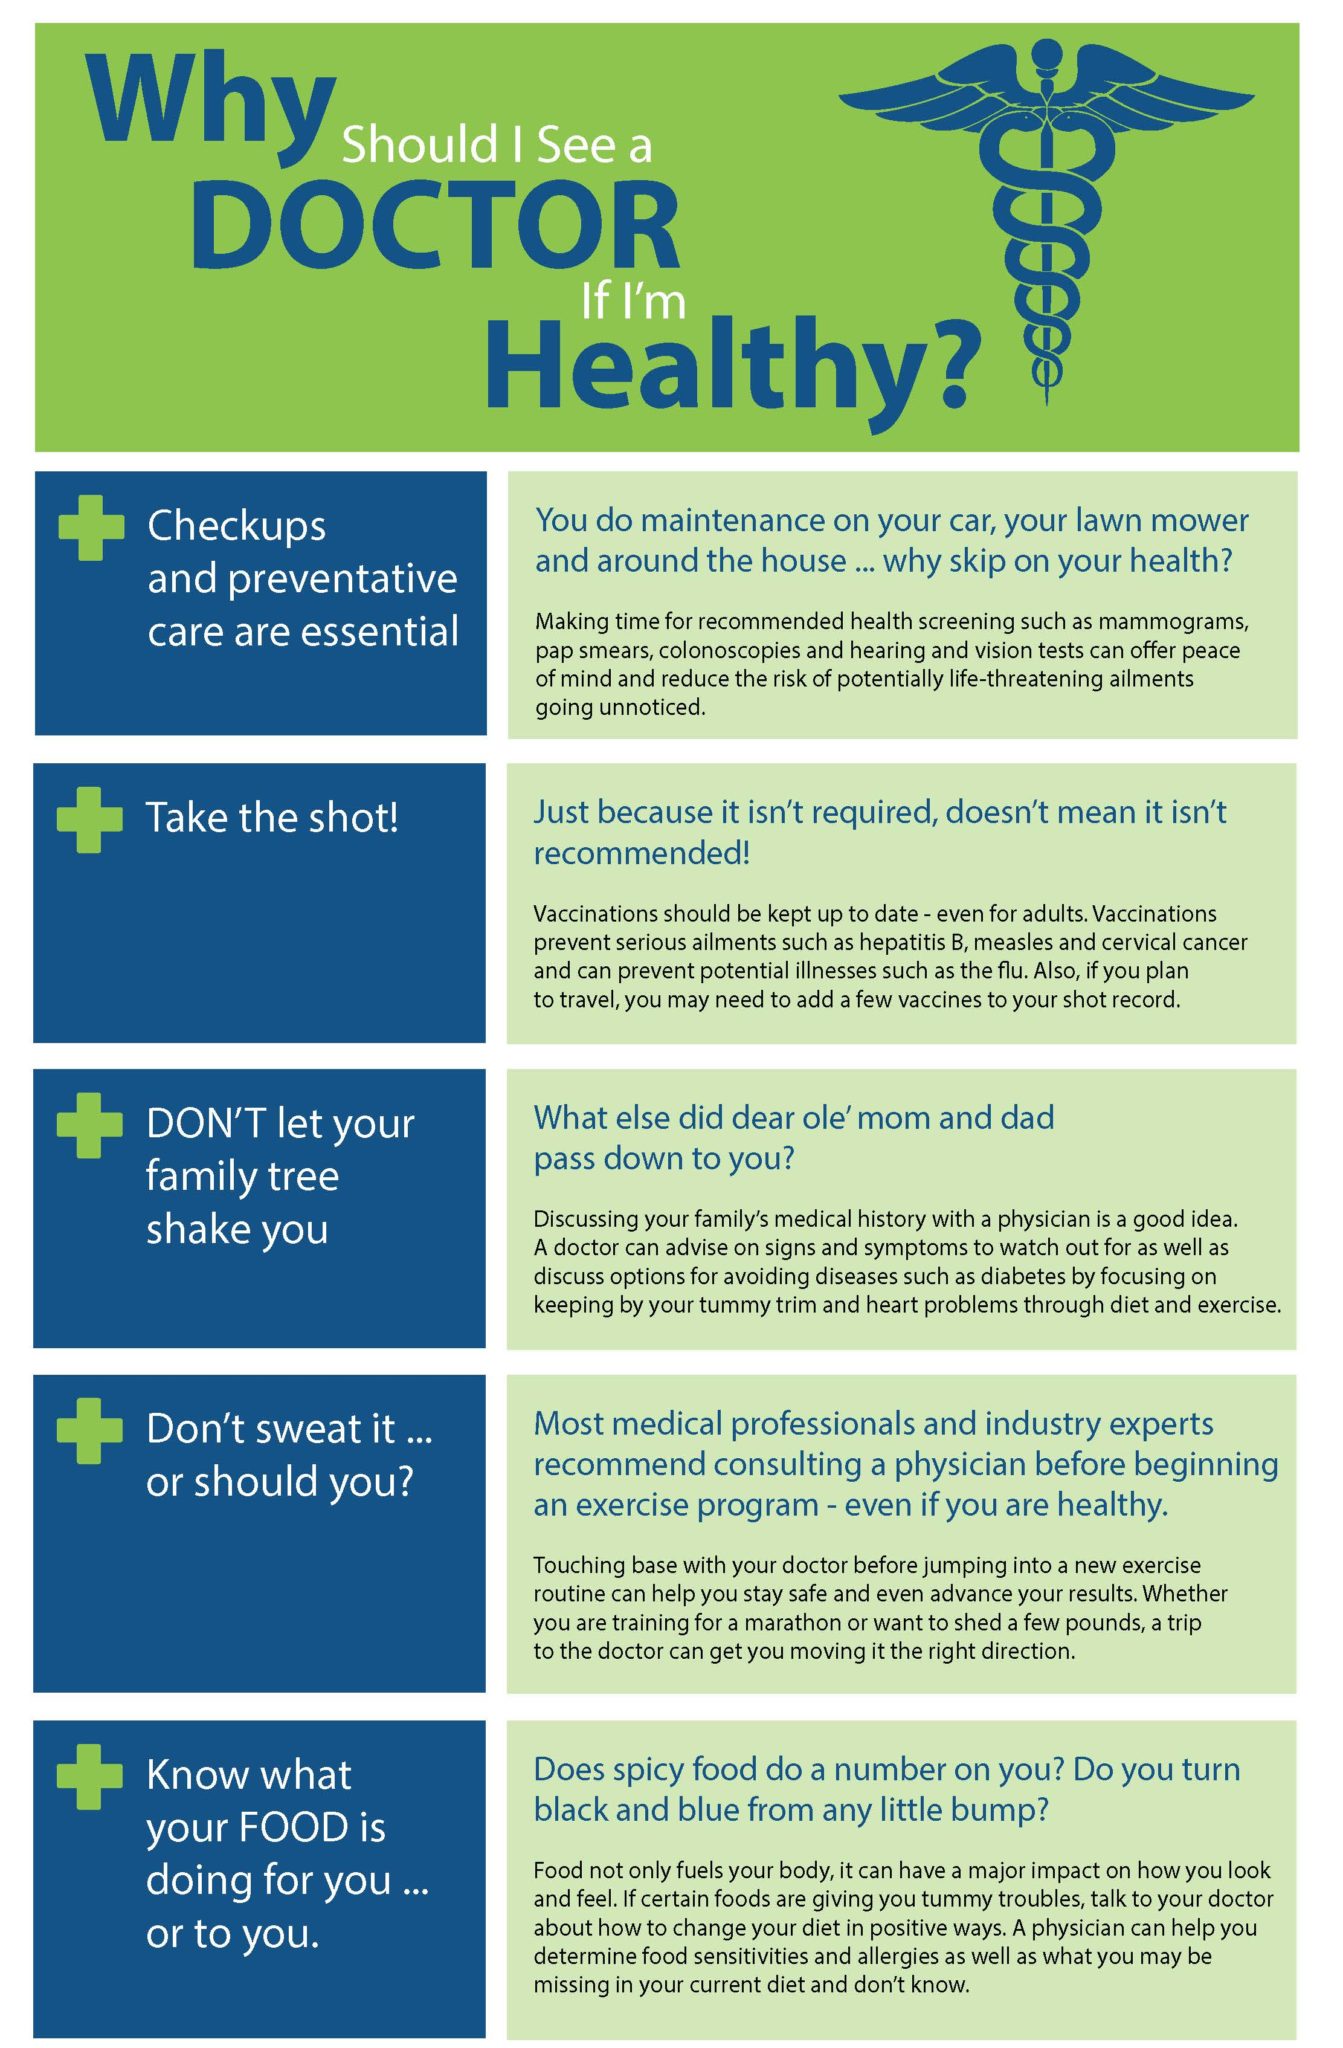 Why do I need to see a doctor if I'm healthy? - SLMA